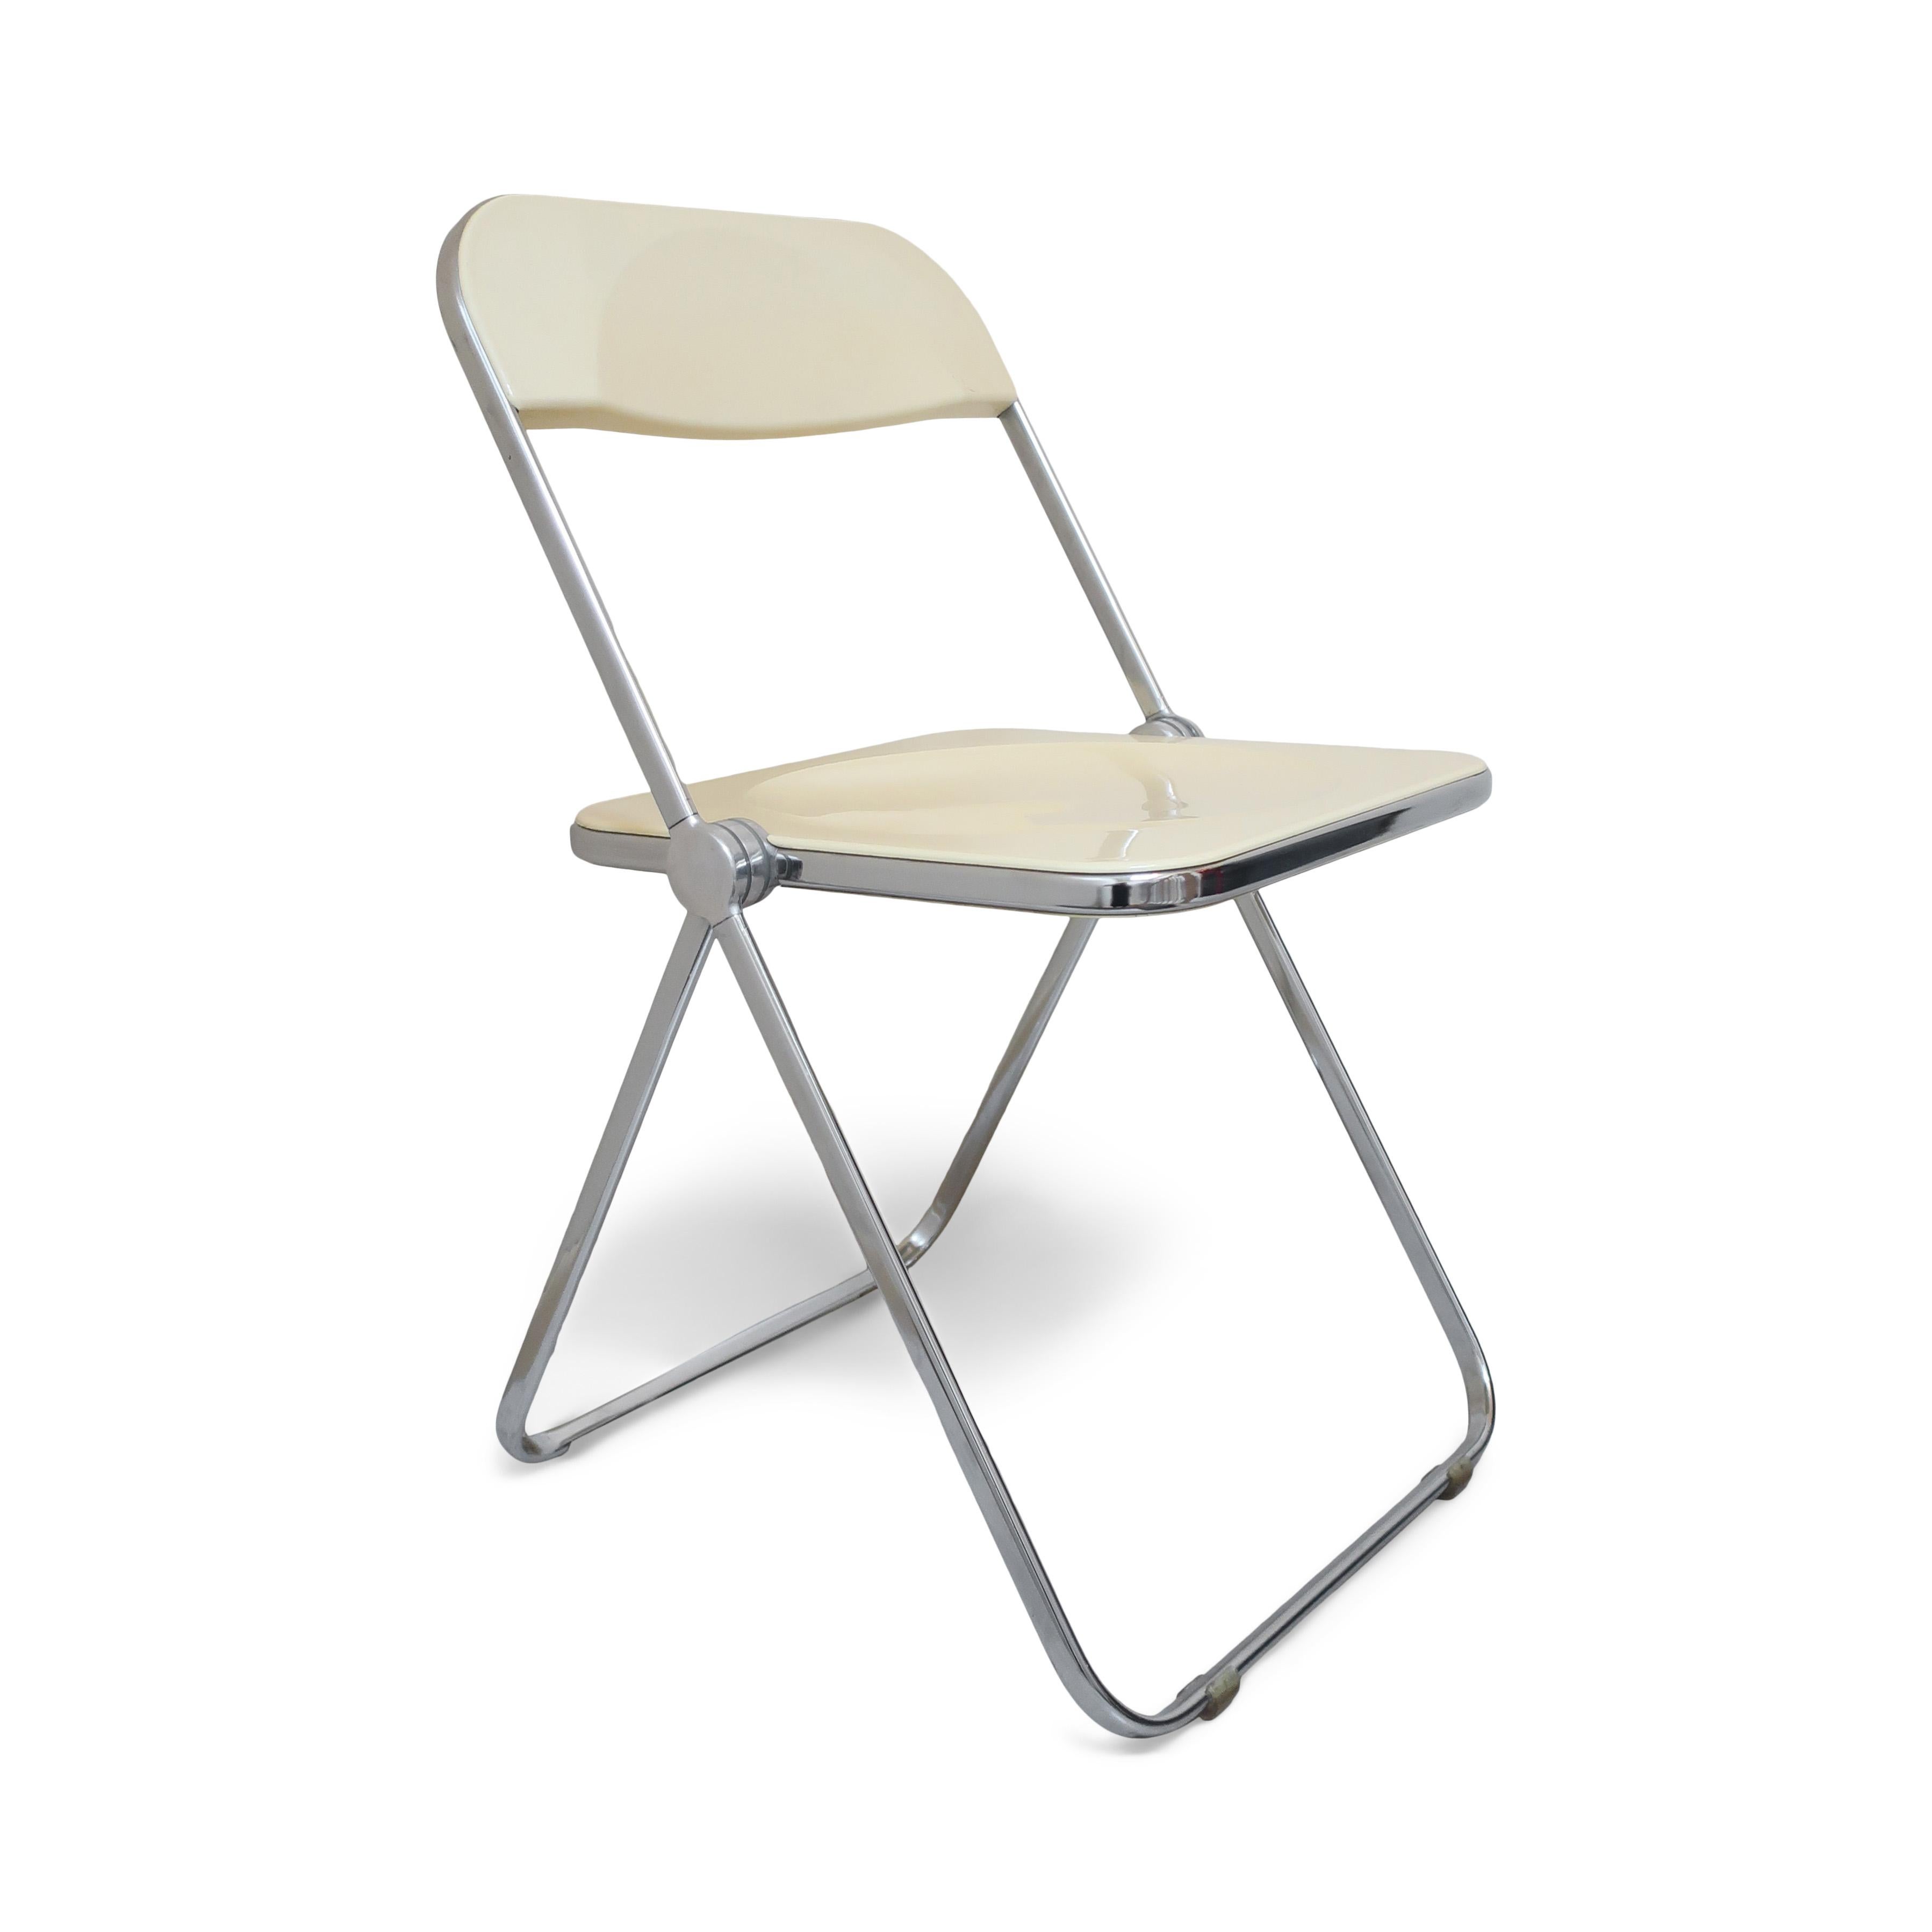 A pair of iconic Plia lucite and chrome folding chairs designed by Giancarlo Piretti for Castelli. Off-white seats and back and a folding chrome frame.

In good vintage condition with wear consistent with age and use. Plia sticker on underside of